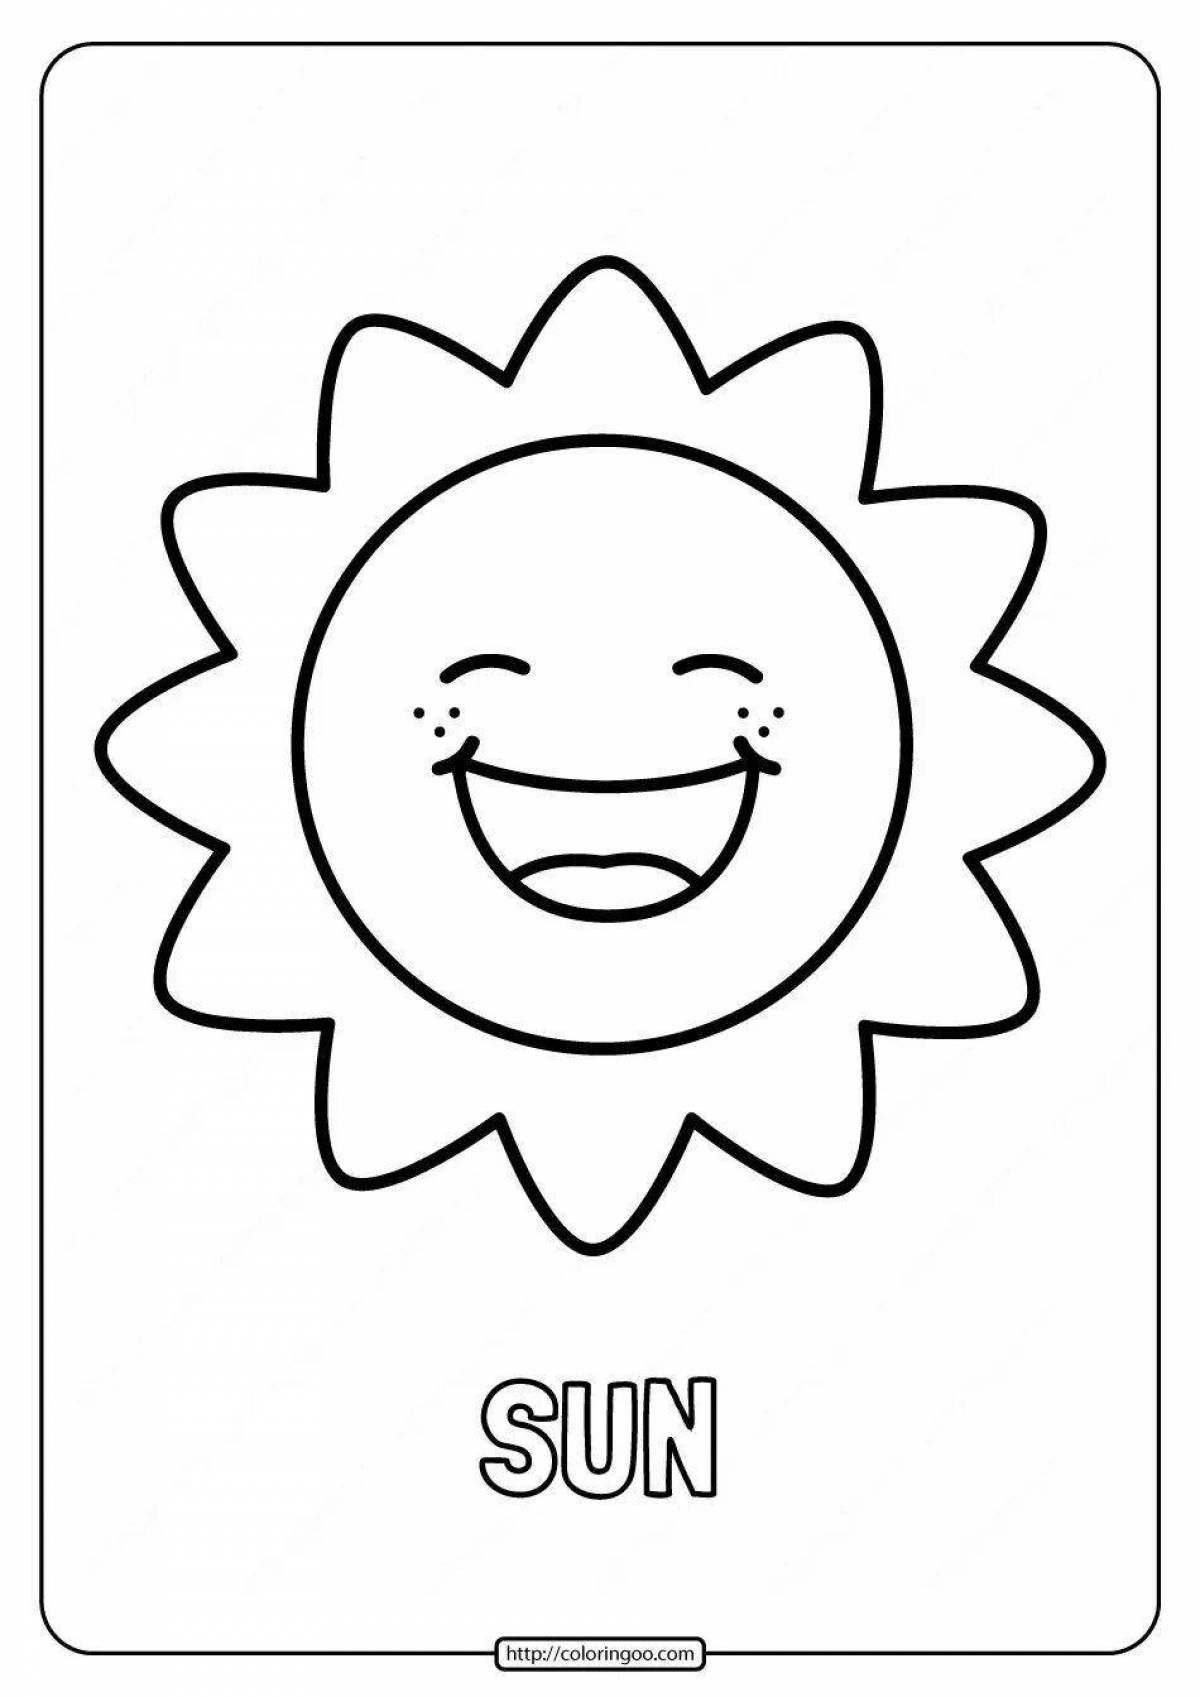 Shining sun coloring book for children 3-4 years old